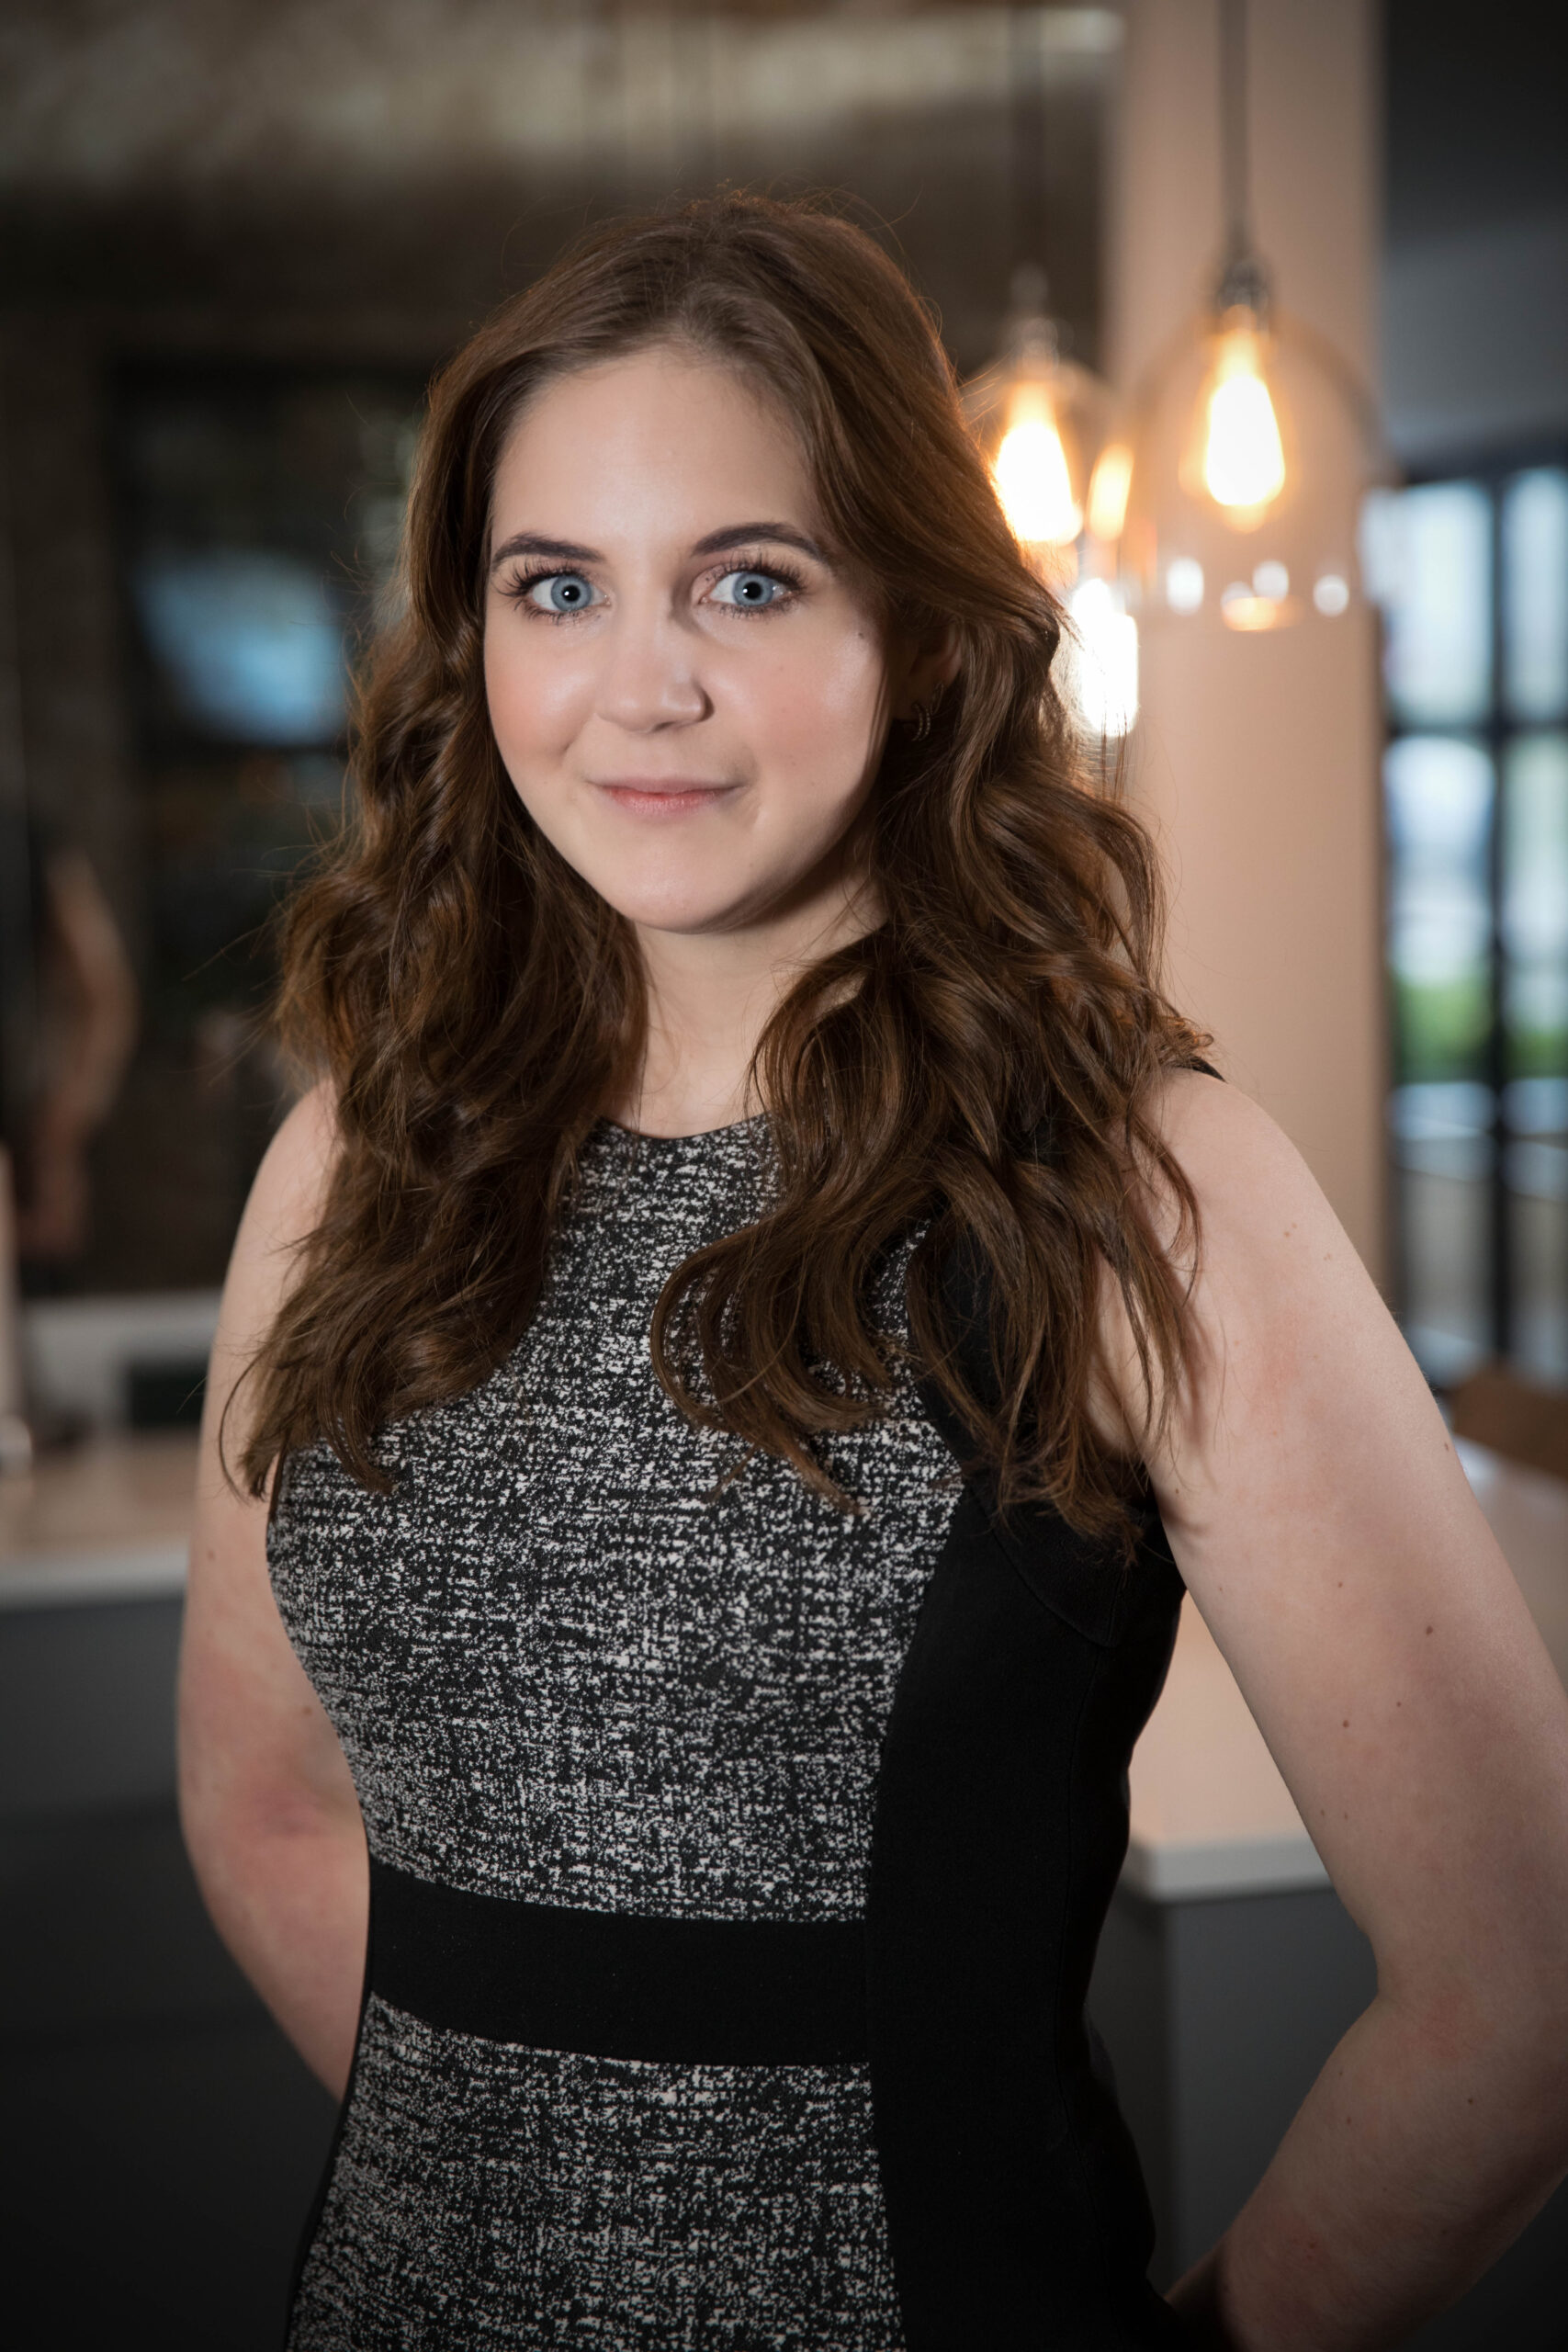 Corporate headshot of a brown haired women in a business pose wearing a dress